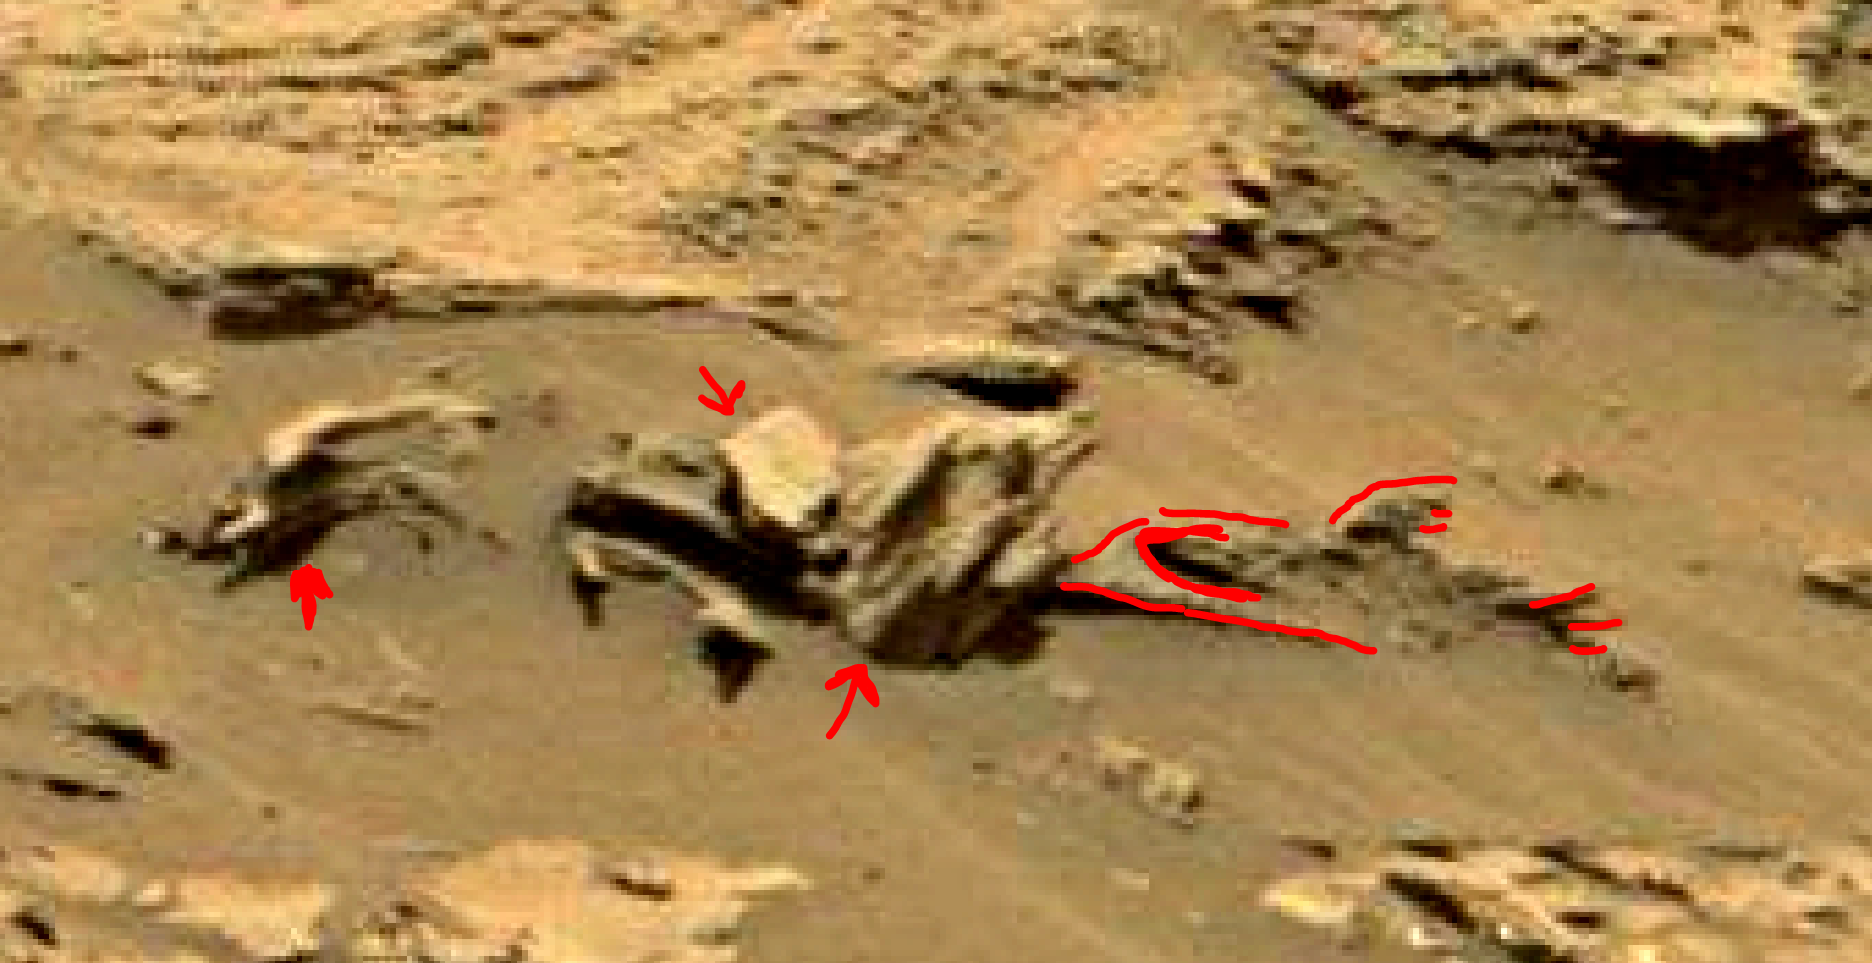 mars sol 1353 anomaly-artifacts 17a was life on mars